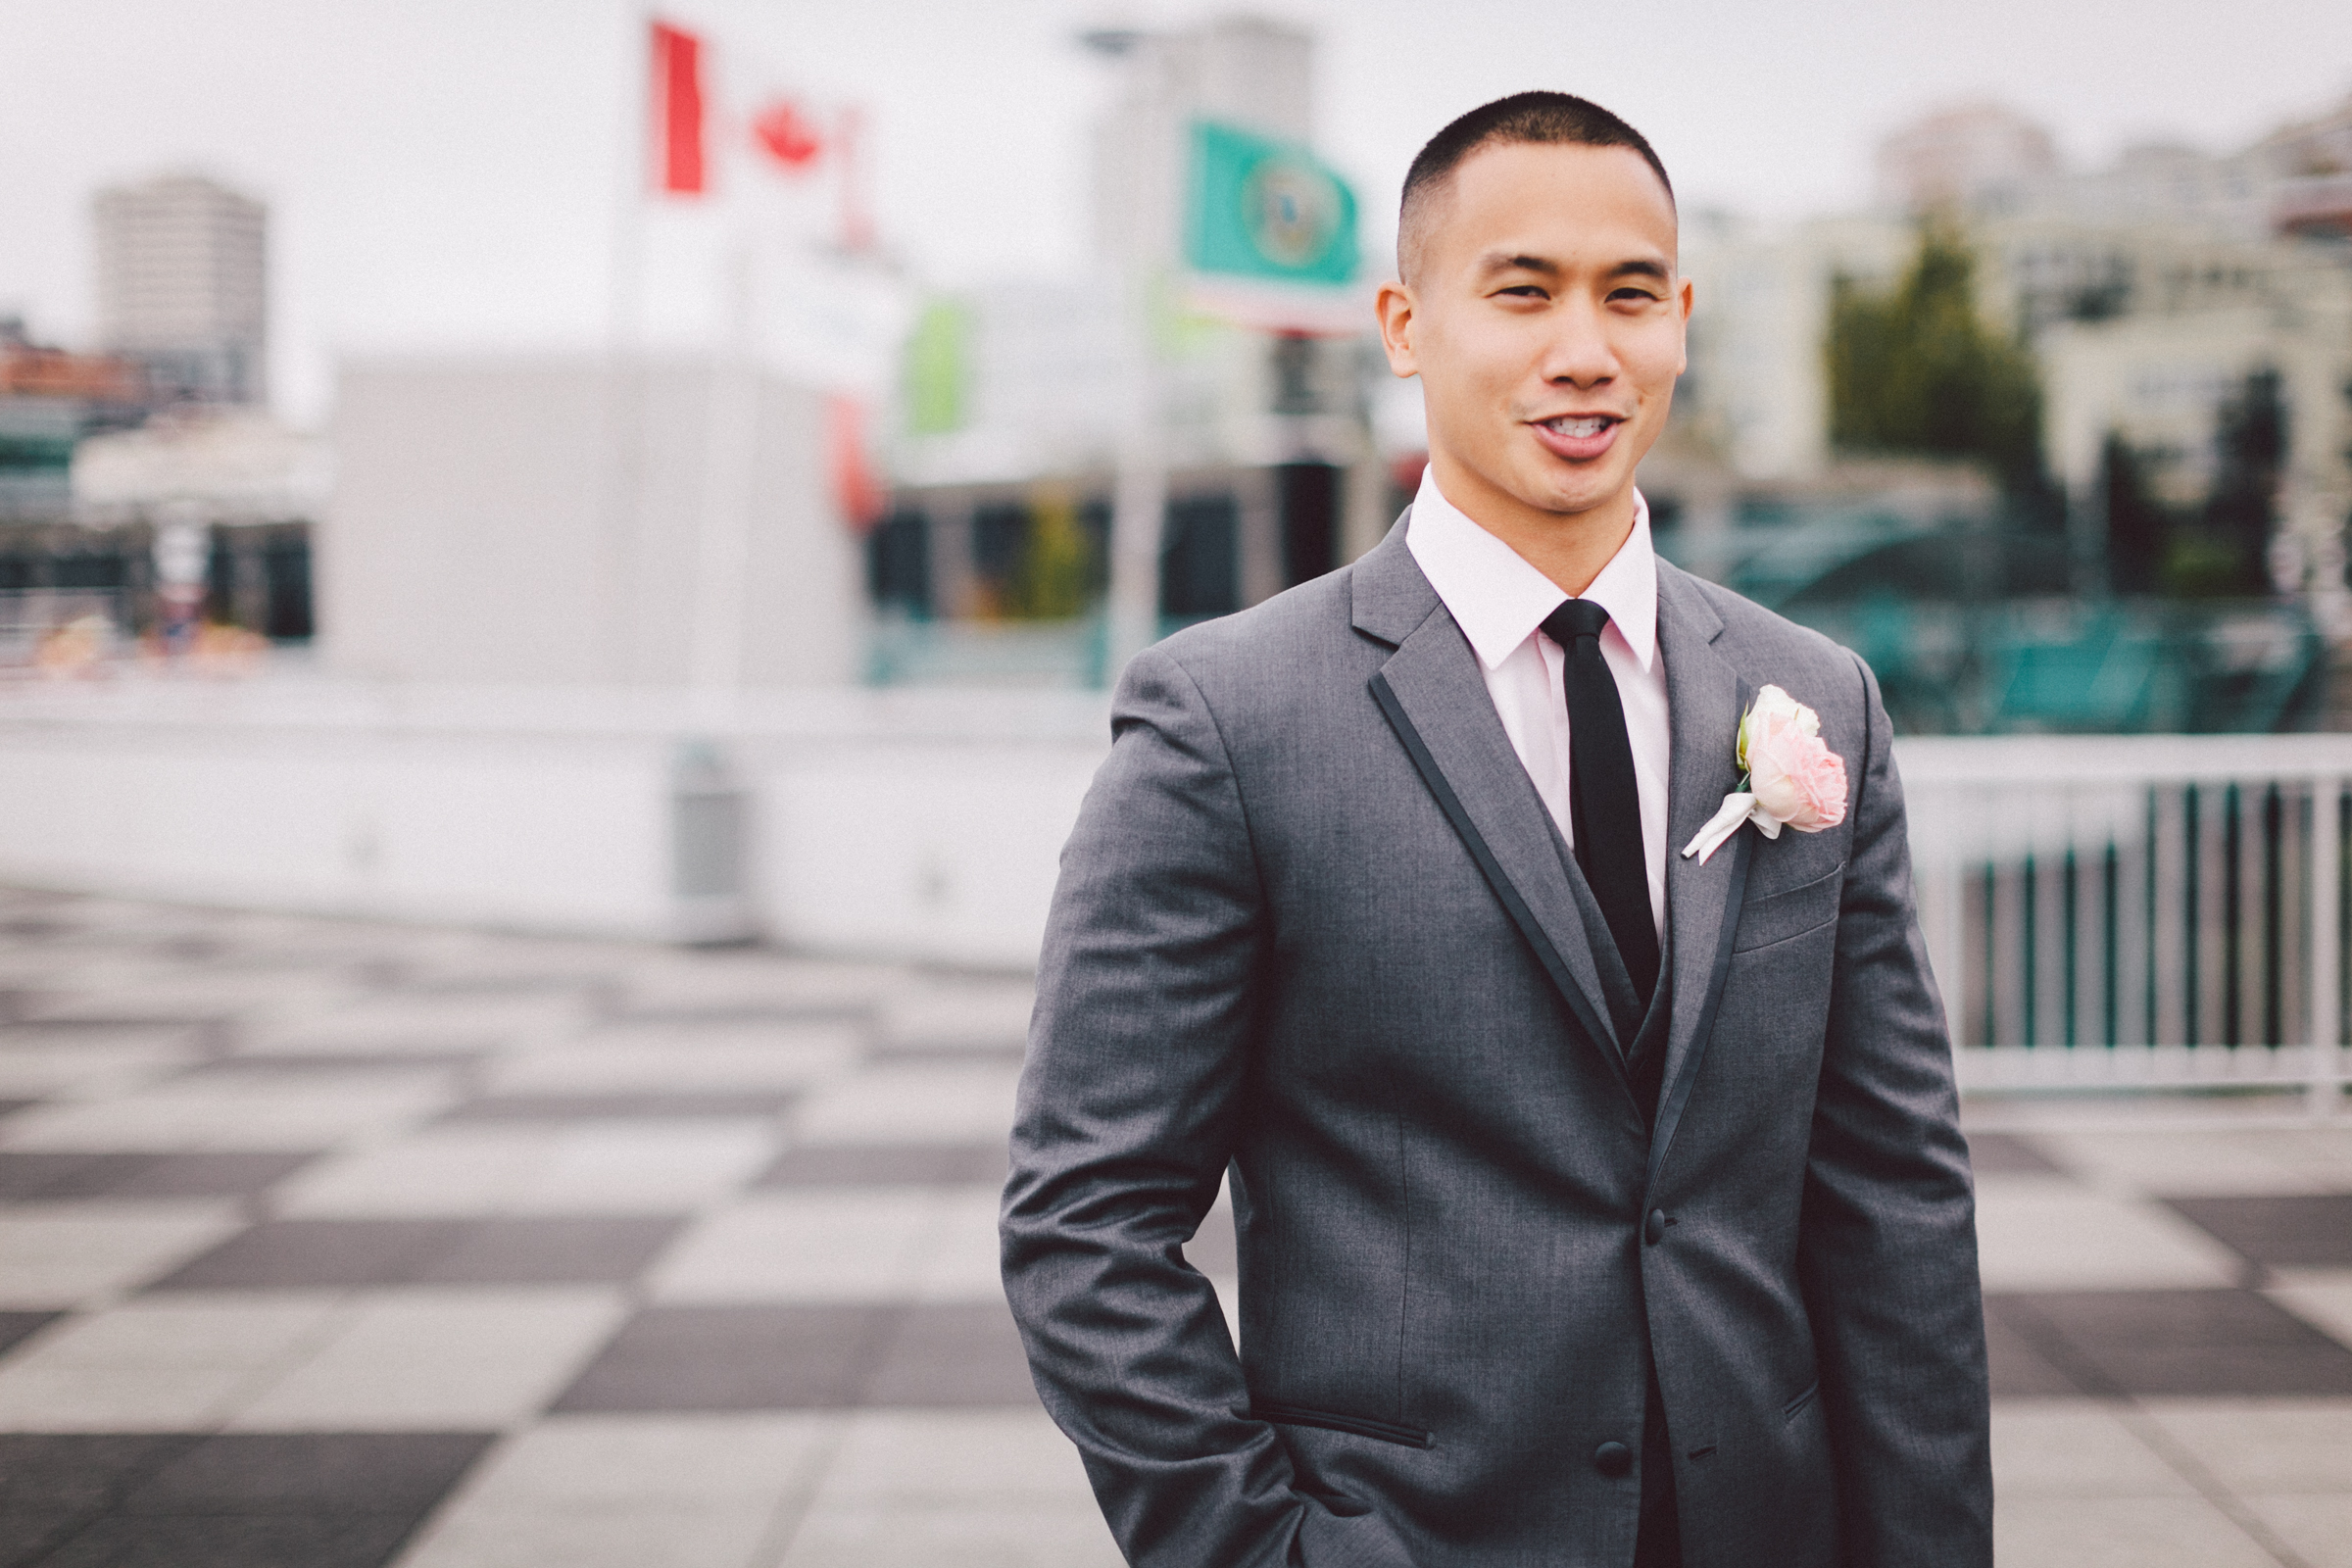 Bell Harbor Wedding in Seattle | Filipino Wedding Planner and Coordinator in Seattle | New Creations Wedding Design and Coordination